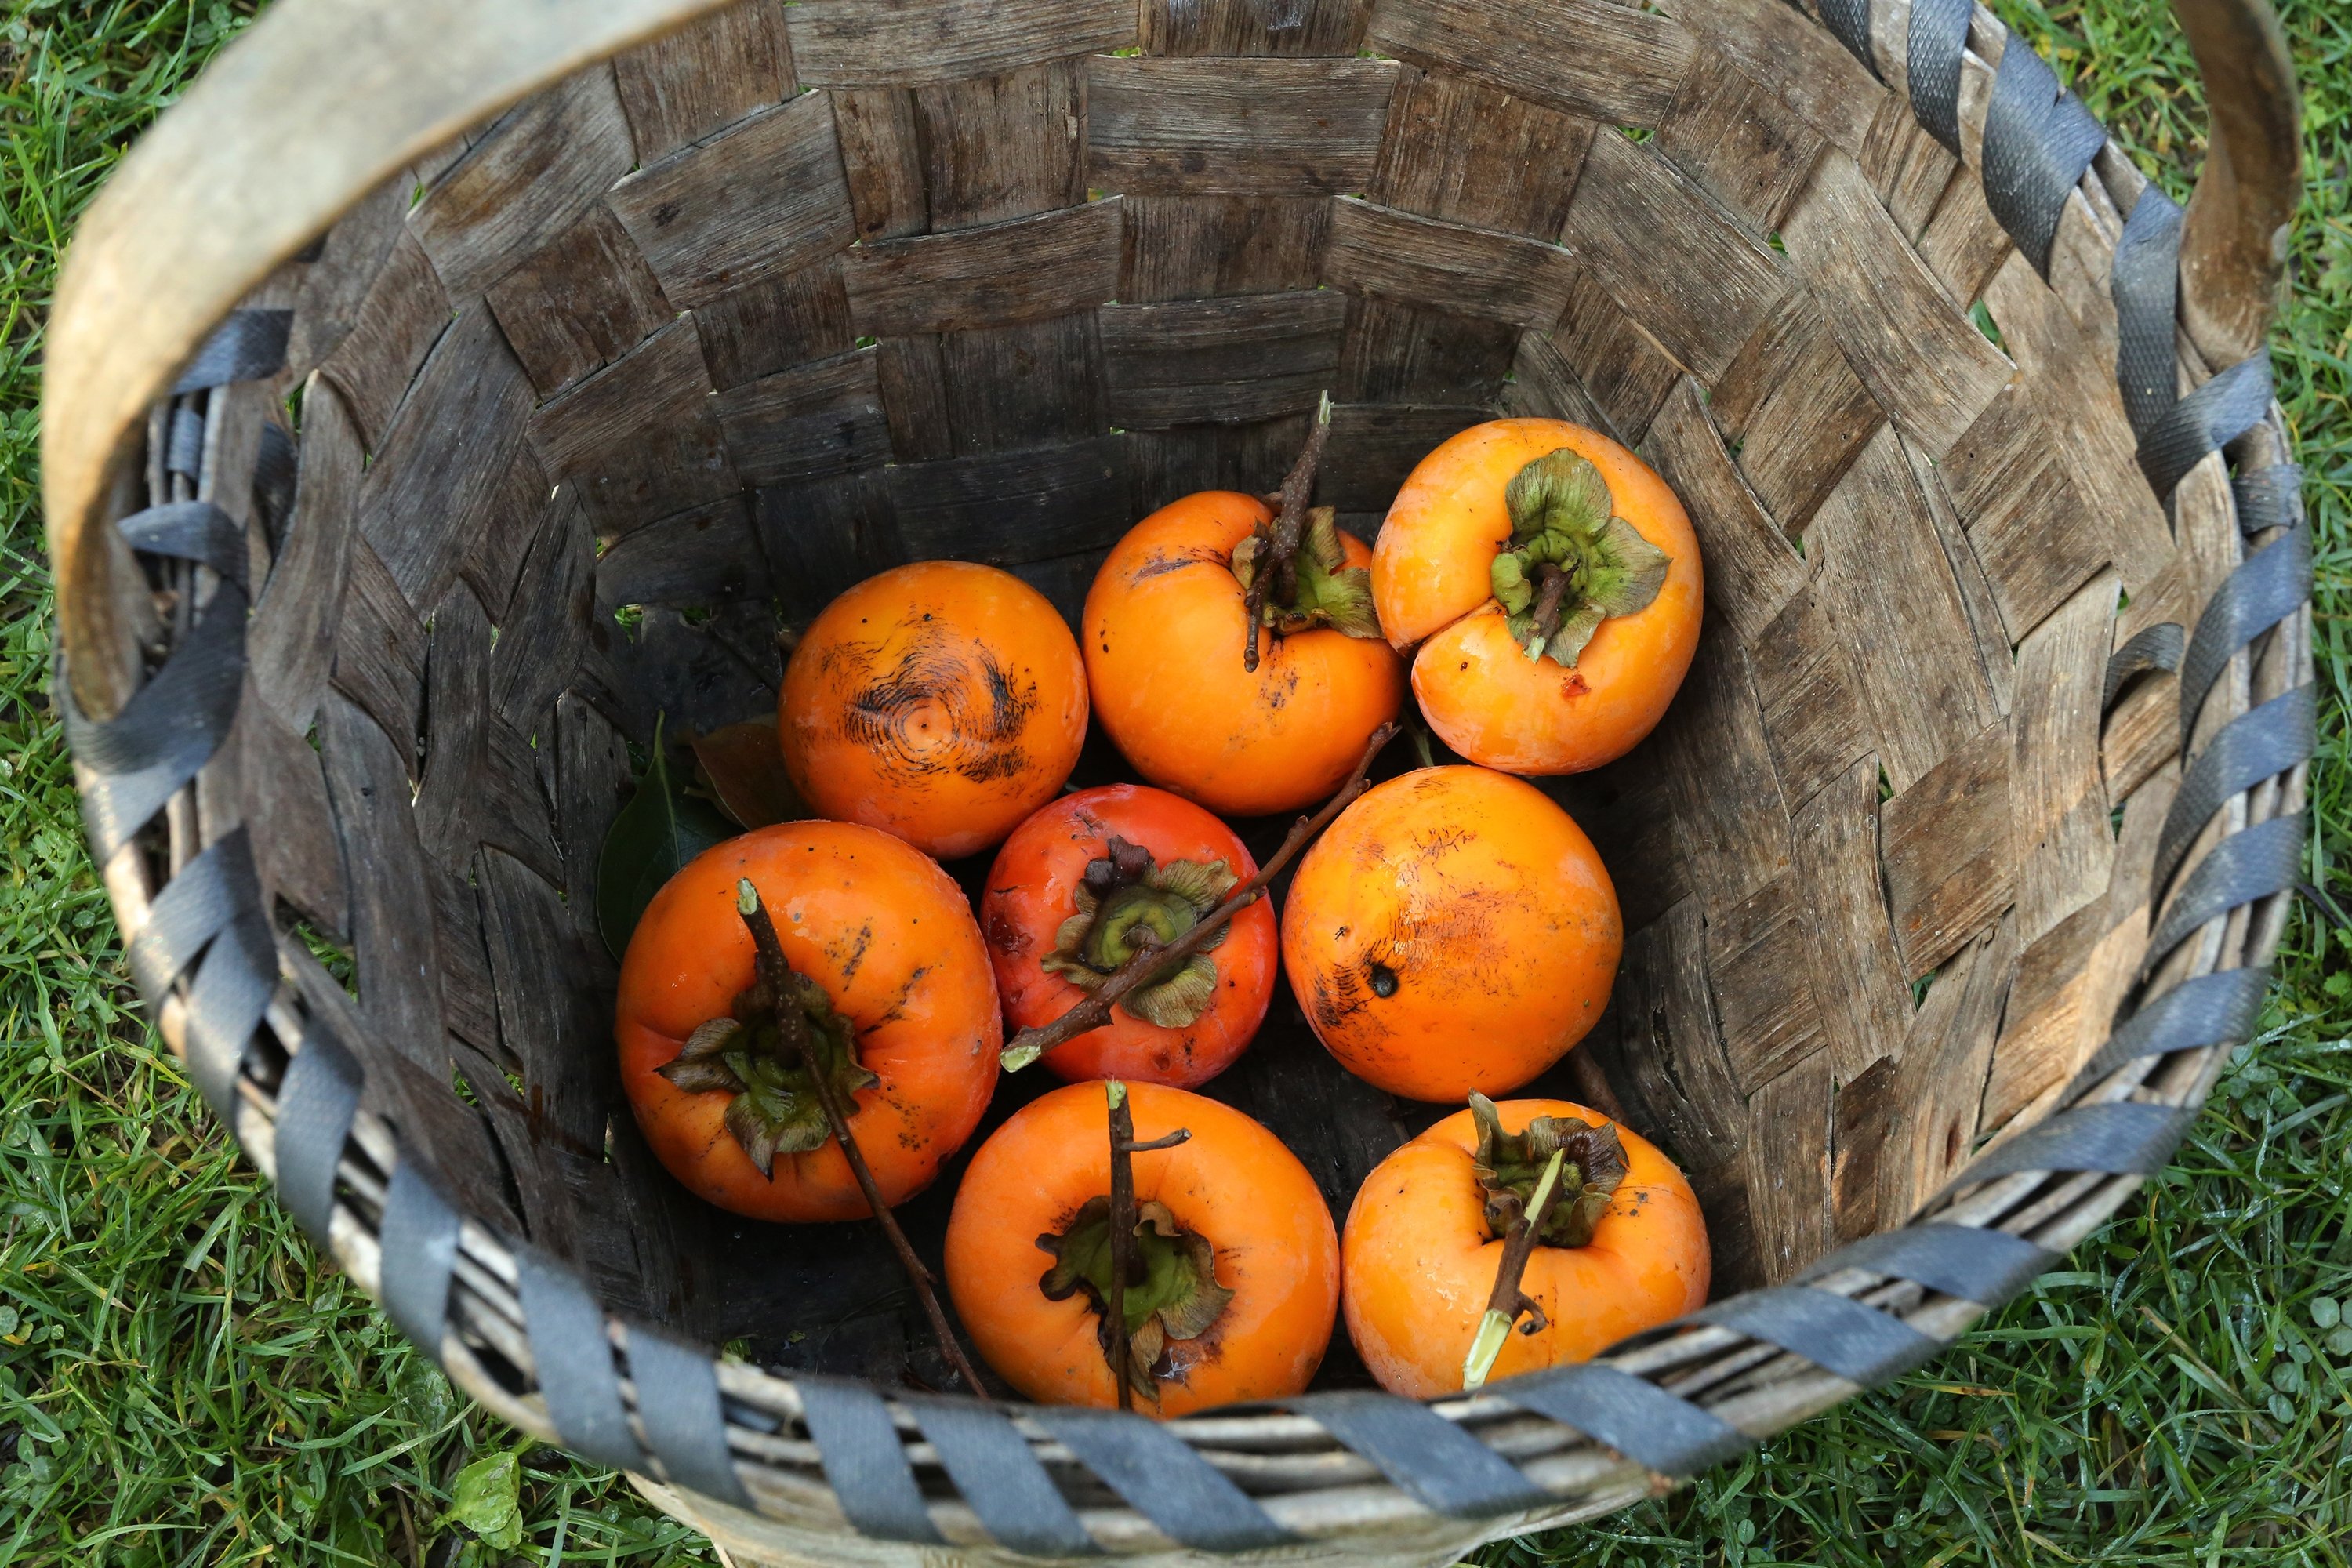 The key to juicy sweet persimmons is to choose ones that are very ripe and almost mushy. (AA Photo)